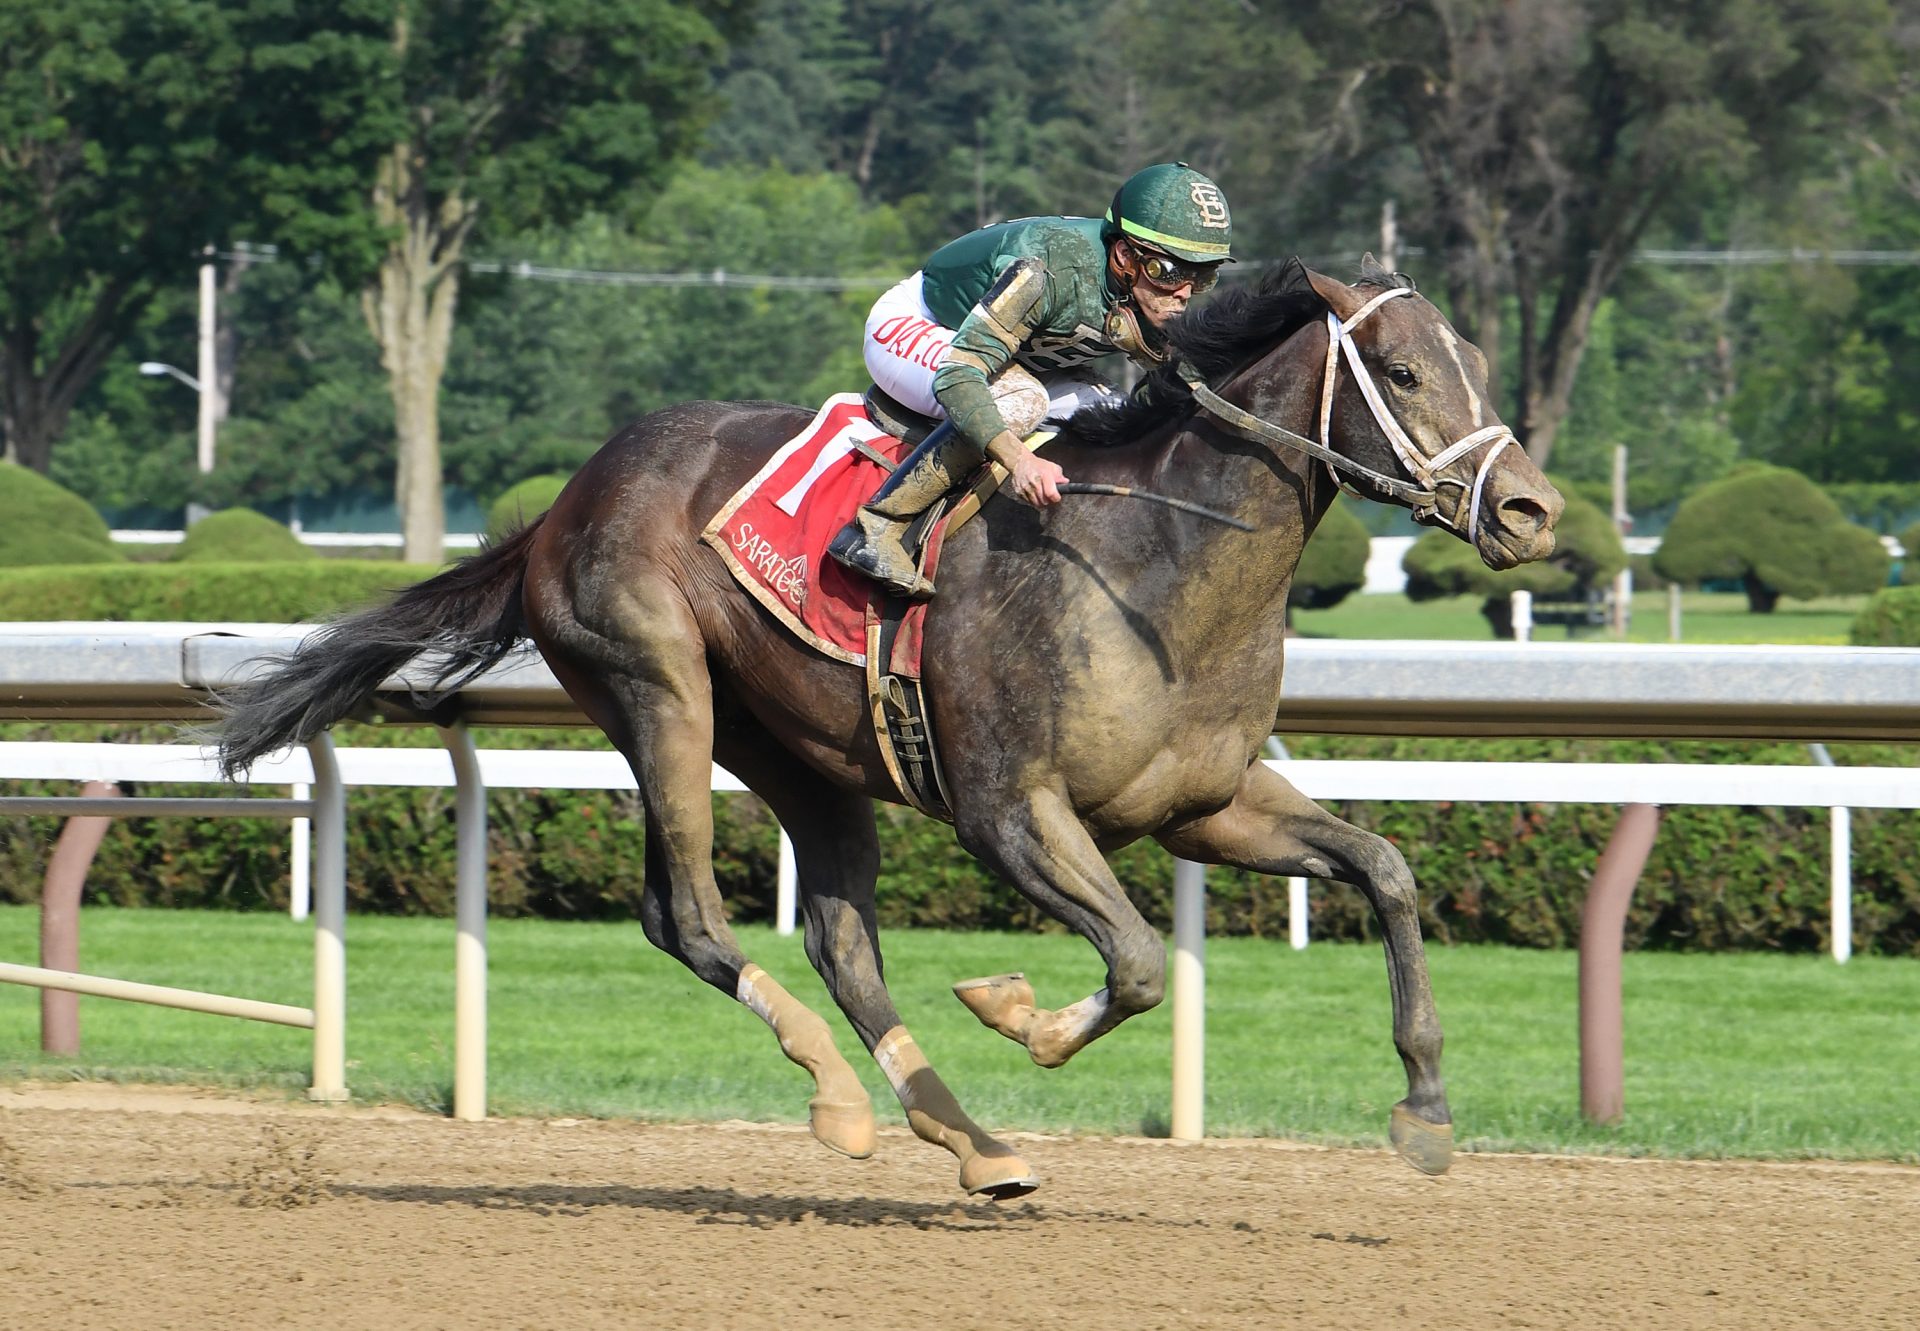 Wit (Practical Joke) Wins The Gr.3 Sanford Stakes at Saratoga